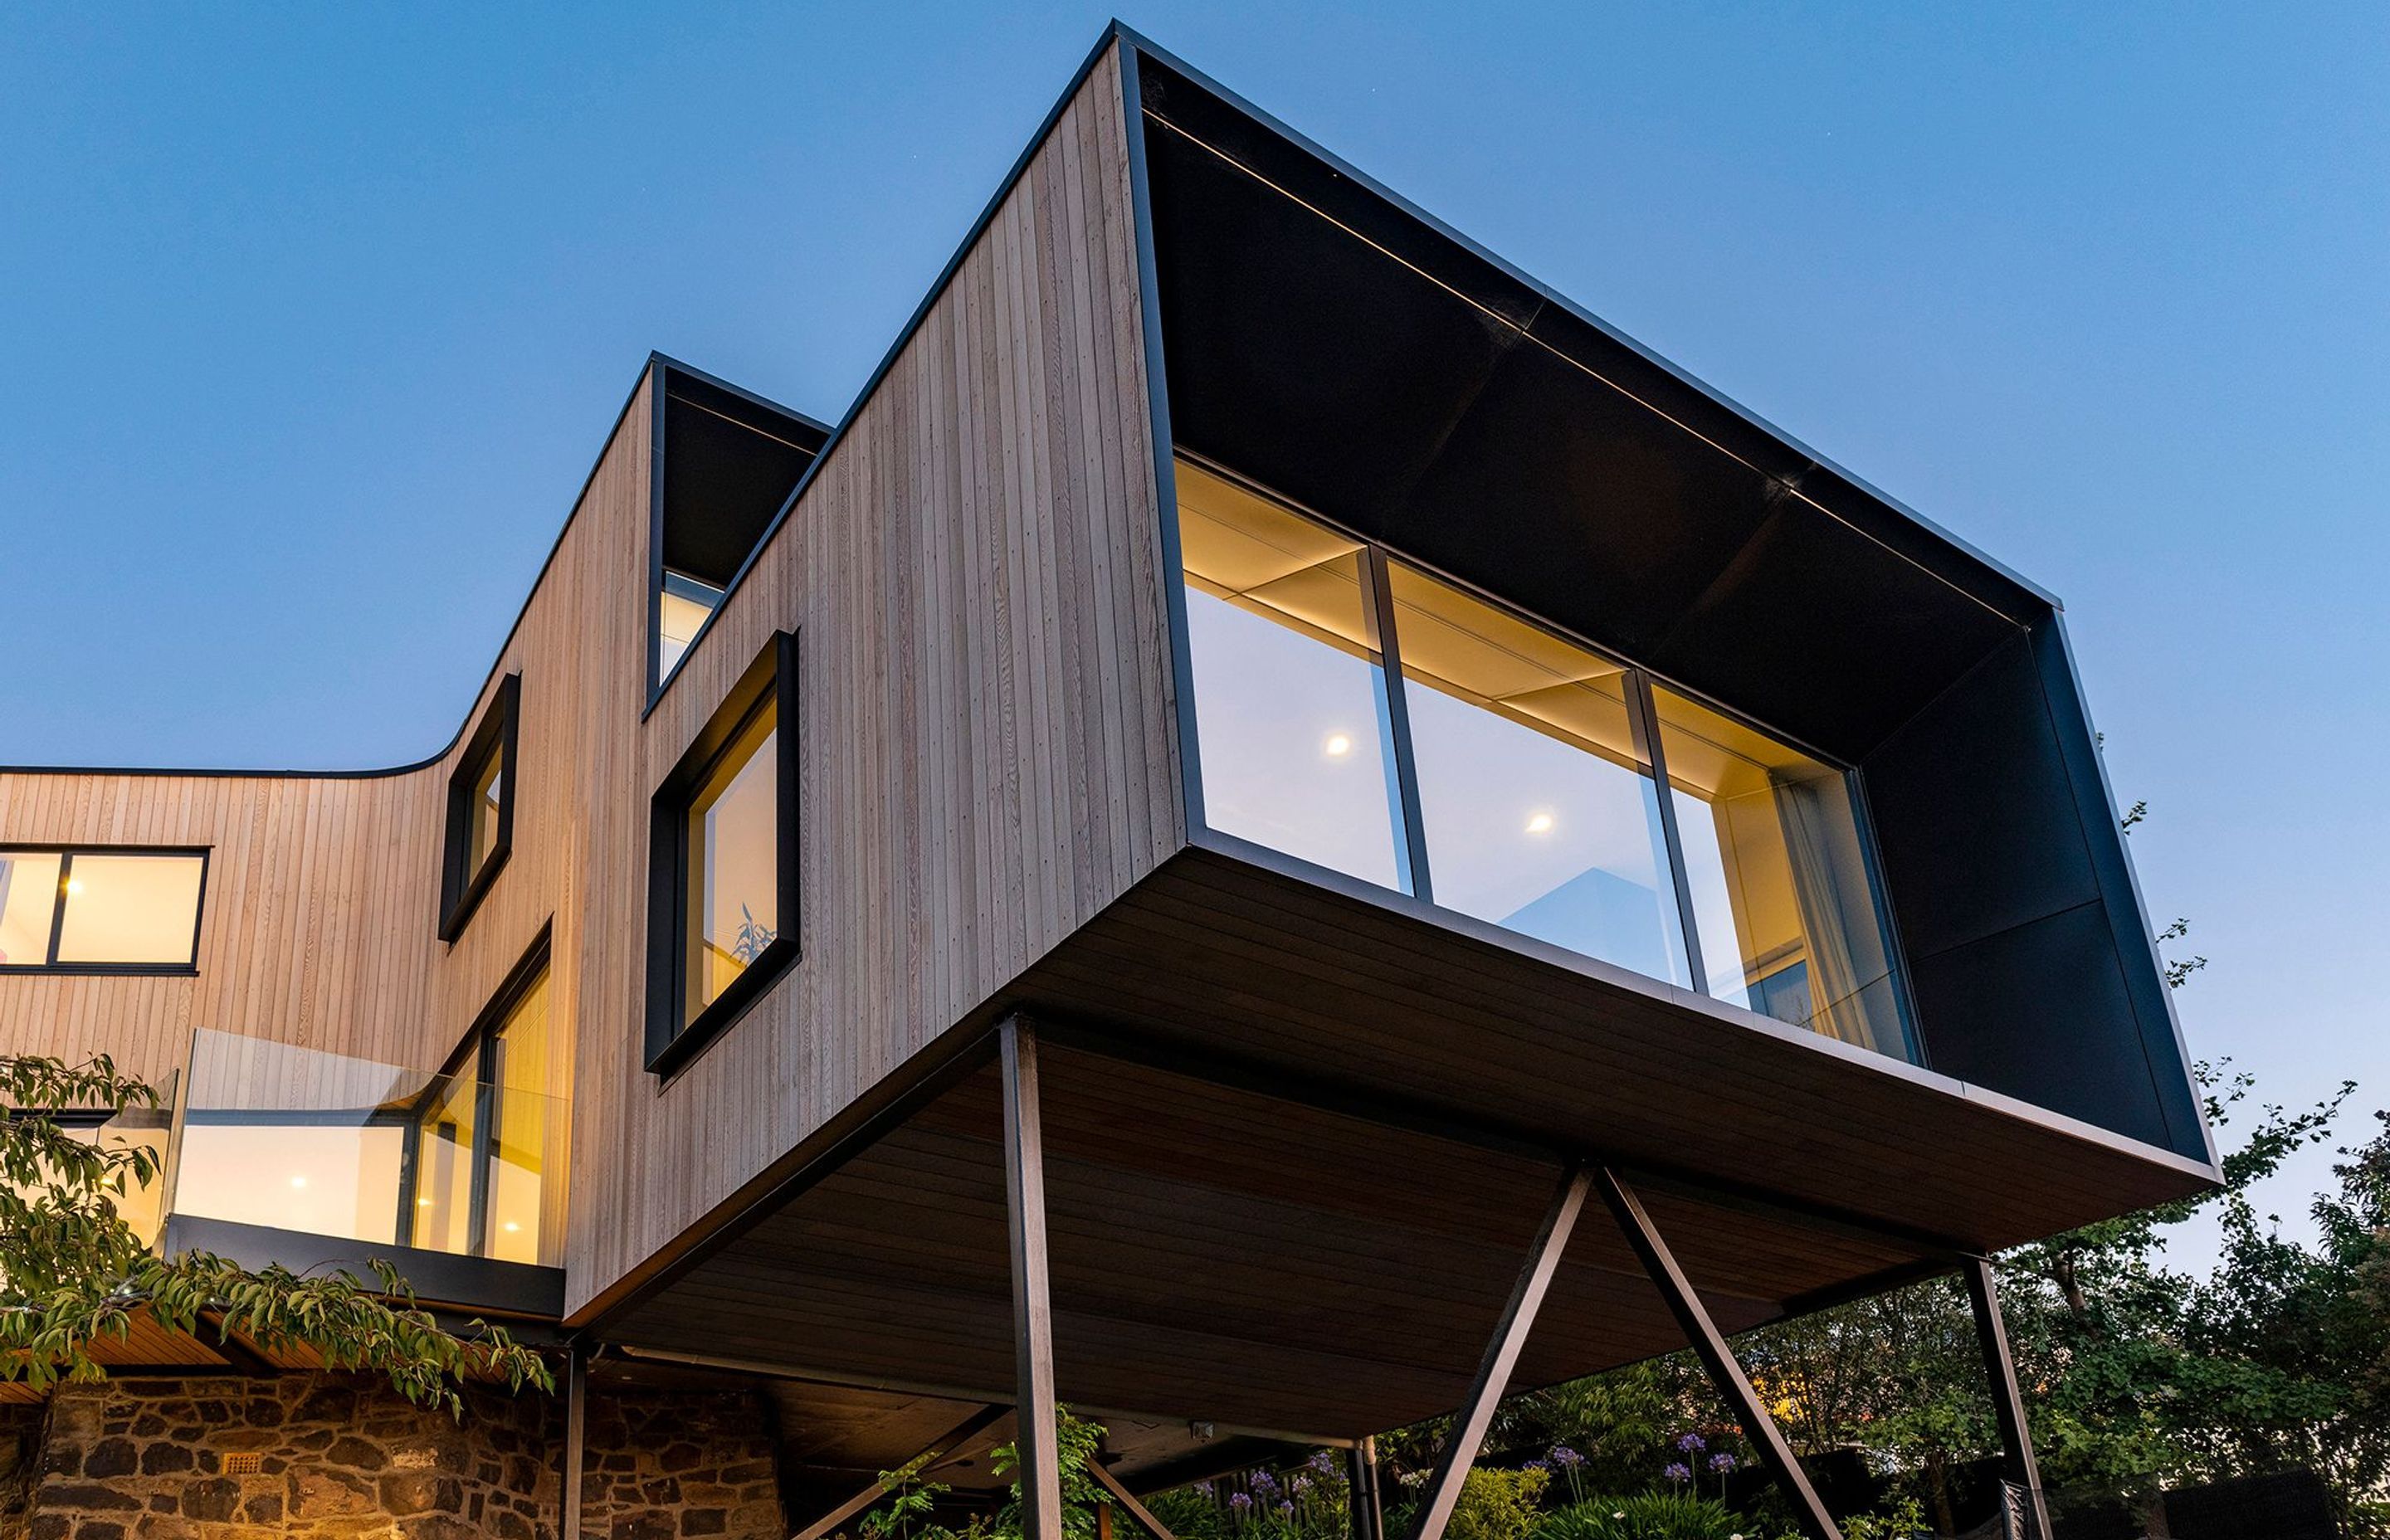 CoLab's light cedar-clad form is perched on slender steel stilts over the historic foundations of one of Christchurch's most influential architects, Samuel Hurst Seager.